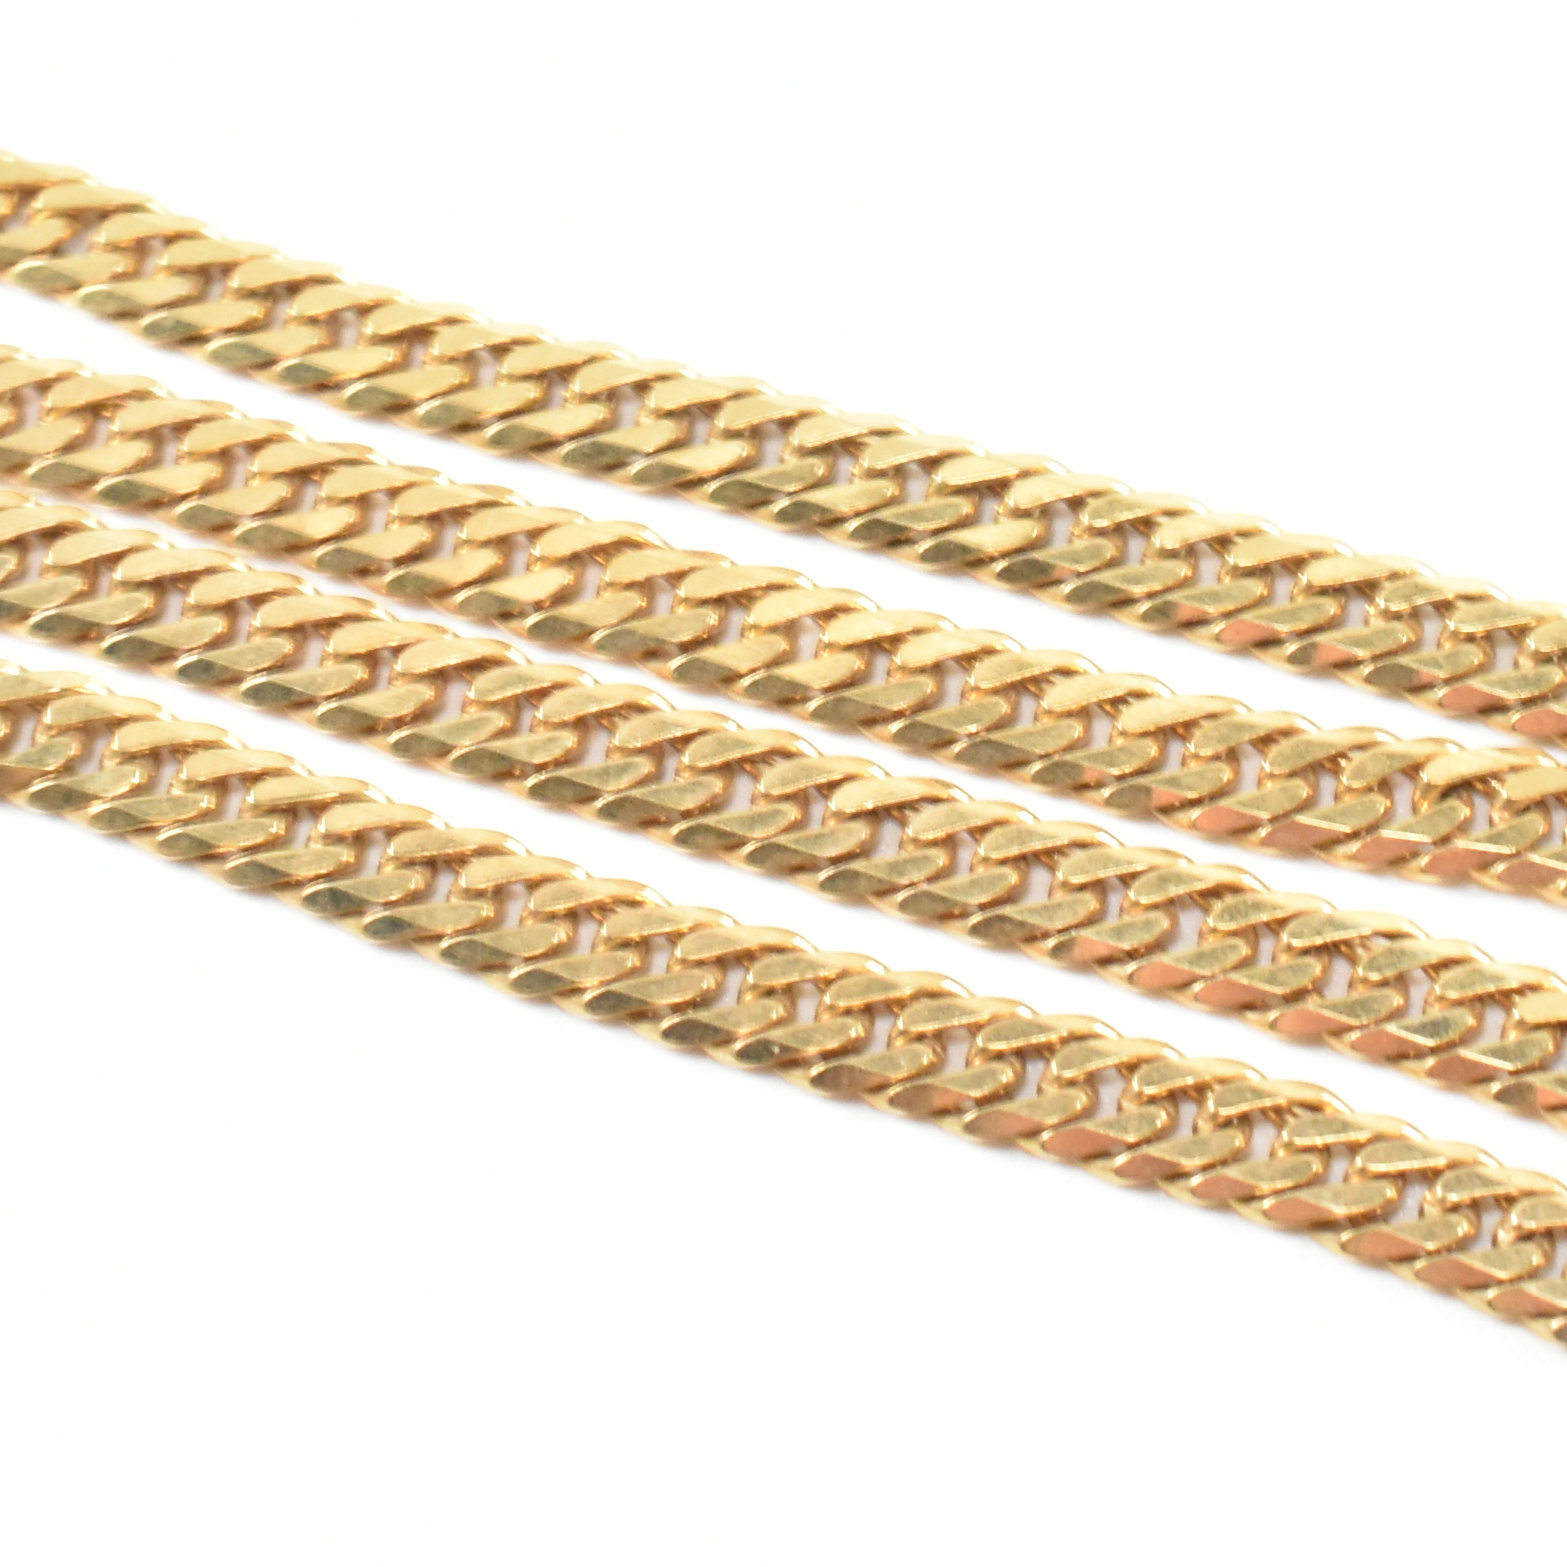 HALLMARKED 9CT GOLD FLAT CURB LINK CHAIN NECKLACE - Image 5 of 5